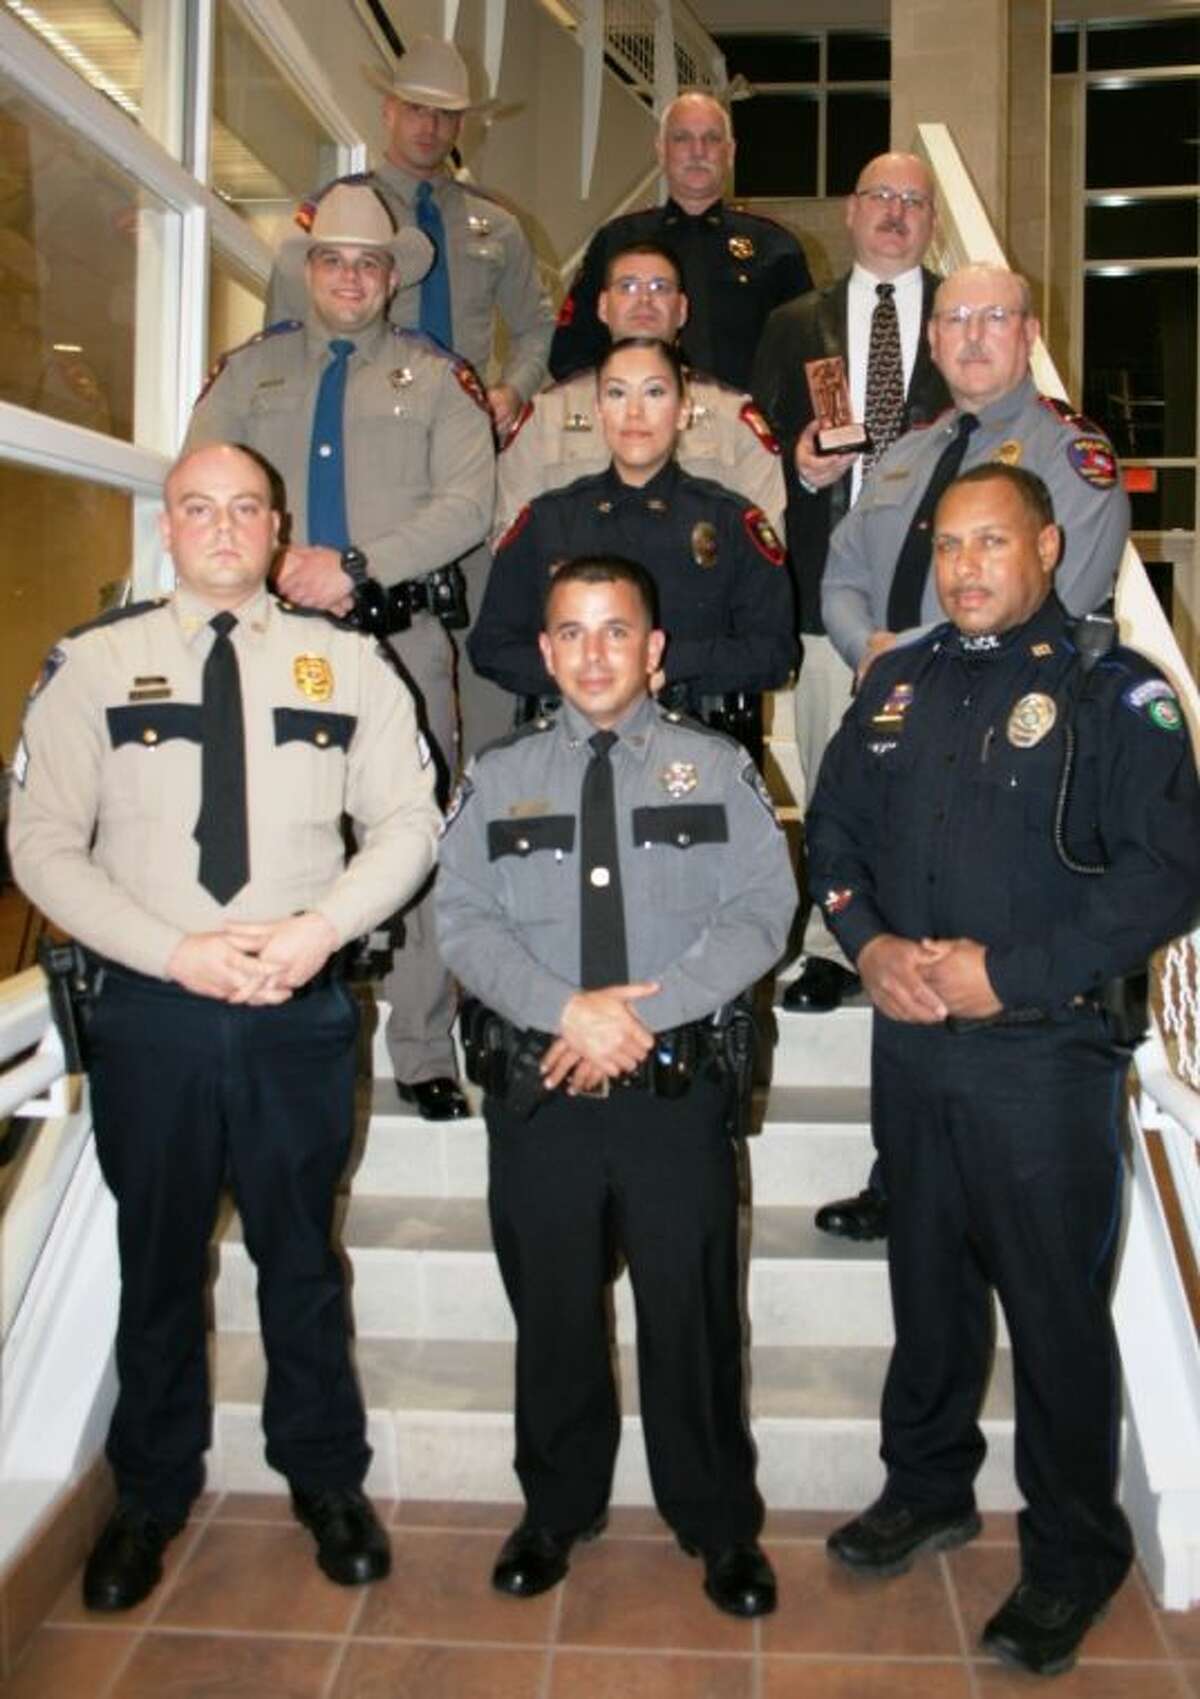 East Montgomery County law enforcement officers, including Deputy Jesse Bullinger, Detective Sgt. Steve Mullins, Deputy Robert Layman, Sgt. Dimitri Jasonis, Officer Phillip Balthazar, Lt. John Mays, Officer Lori Rodriguez, Sgt. Robert Meager, Sr., Troopers Derek Peterson and John Sullivan, all received Officer of the Year awards for their individual departments.